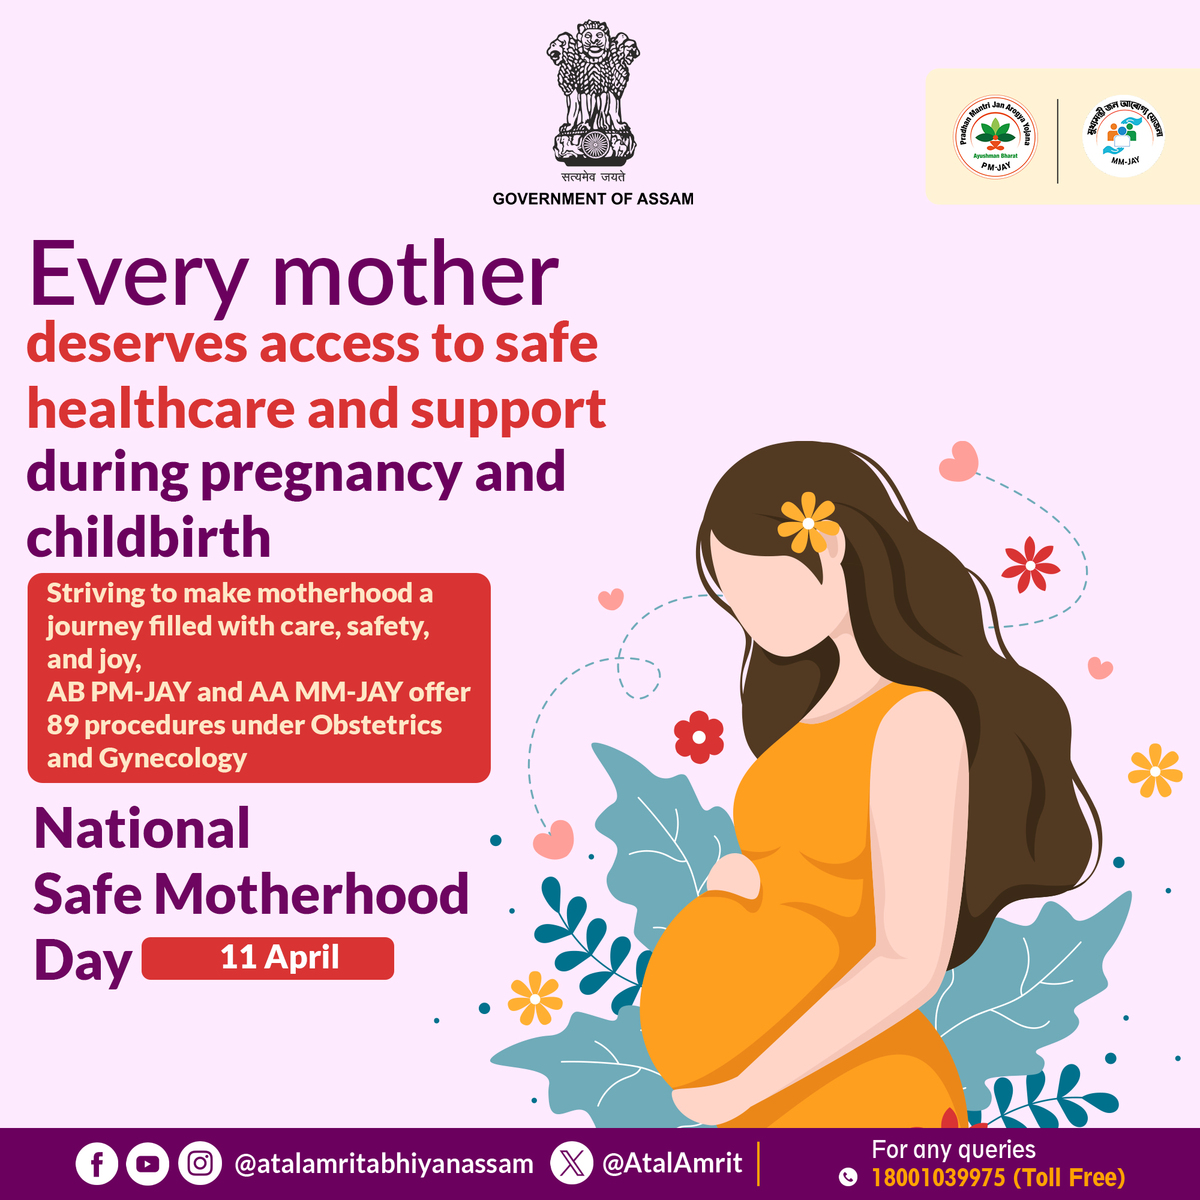 On #NationalSafeMotherhoodDay, let's celebrate the strength and resilience of mothers around the world.

From pregnancy to childbirth and beyond, let's ensure every mother receives the care and support she deserves.

#SafeMotherhood #MaternalHealth #SupportMothers